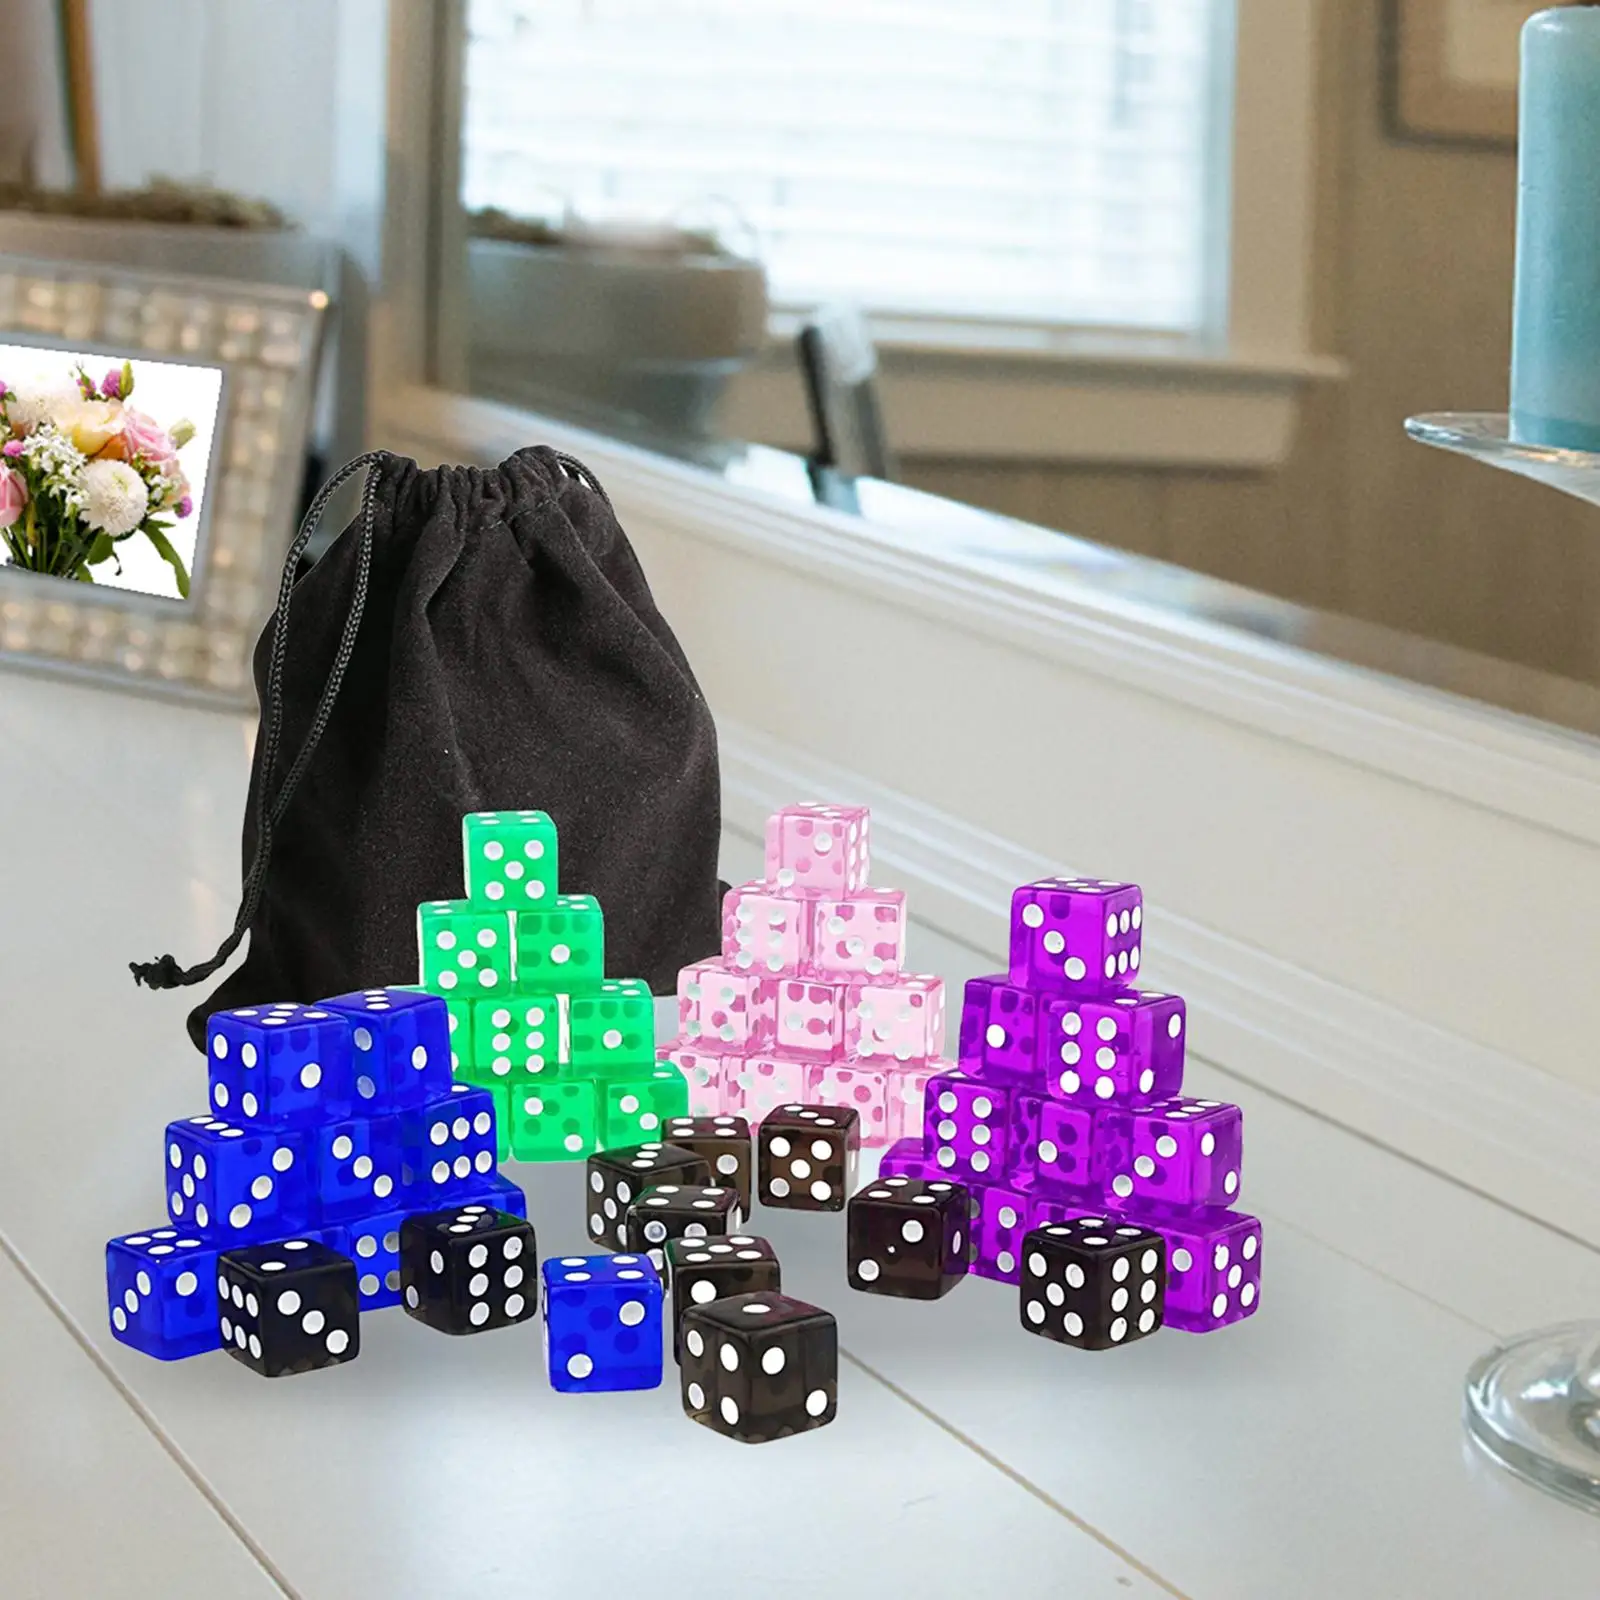 6 Sided Dices, Colored Dices, Math Counting Teaching Aids, Game Dices, Party Supplies